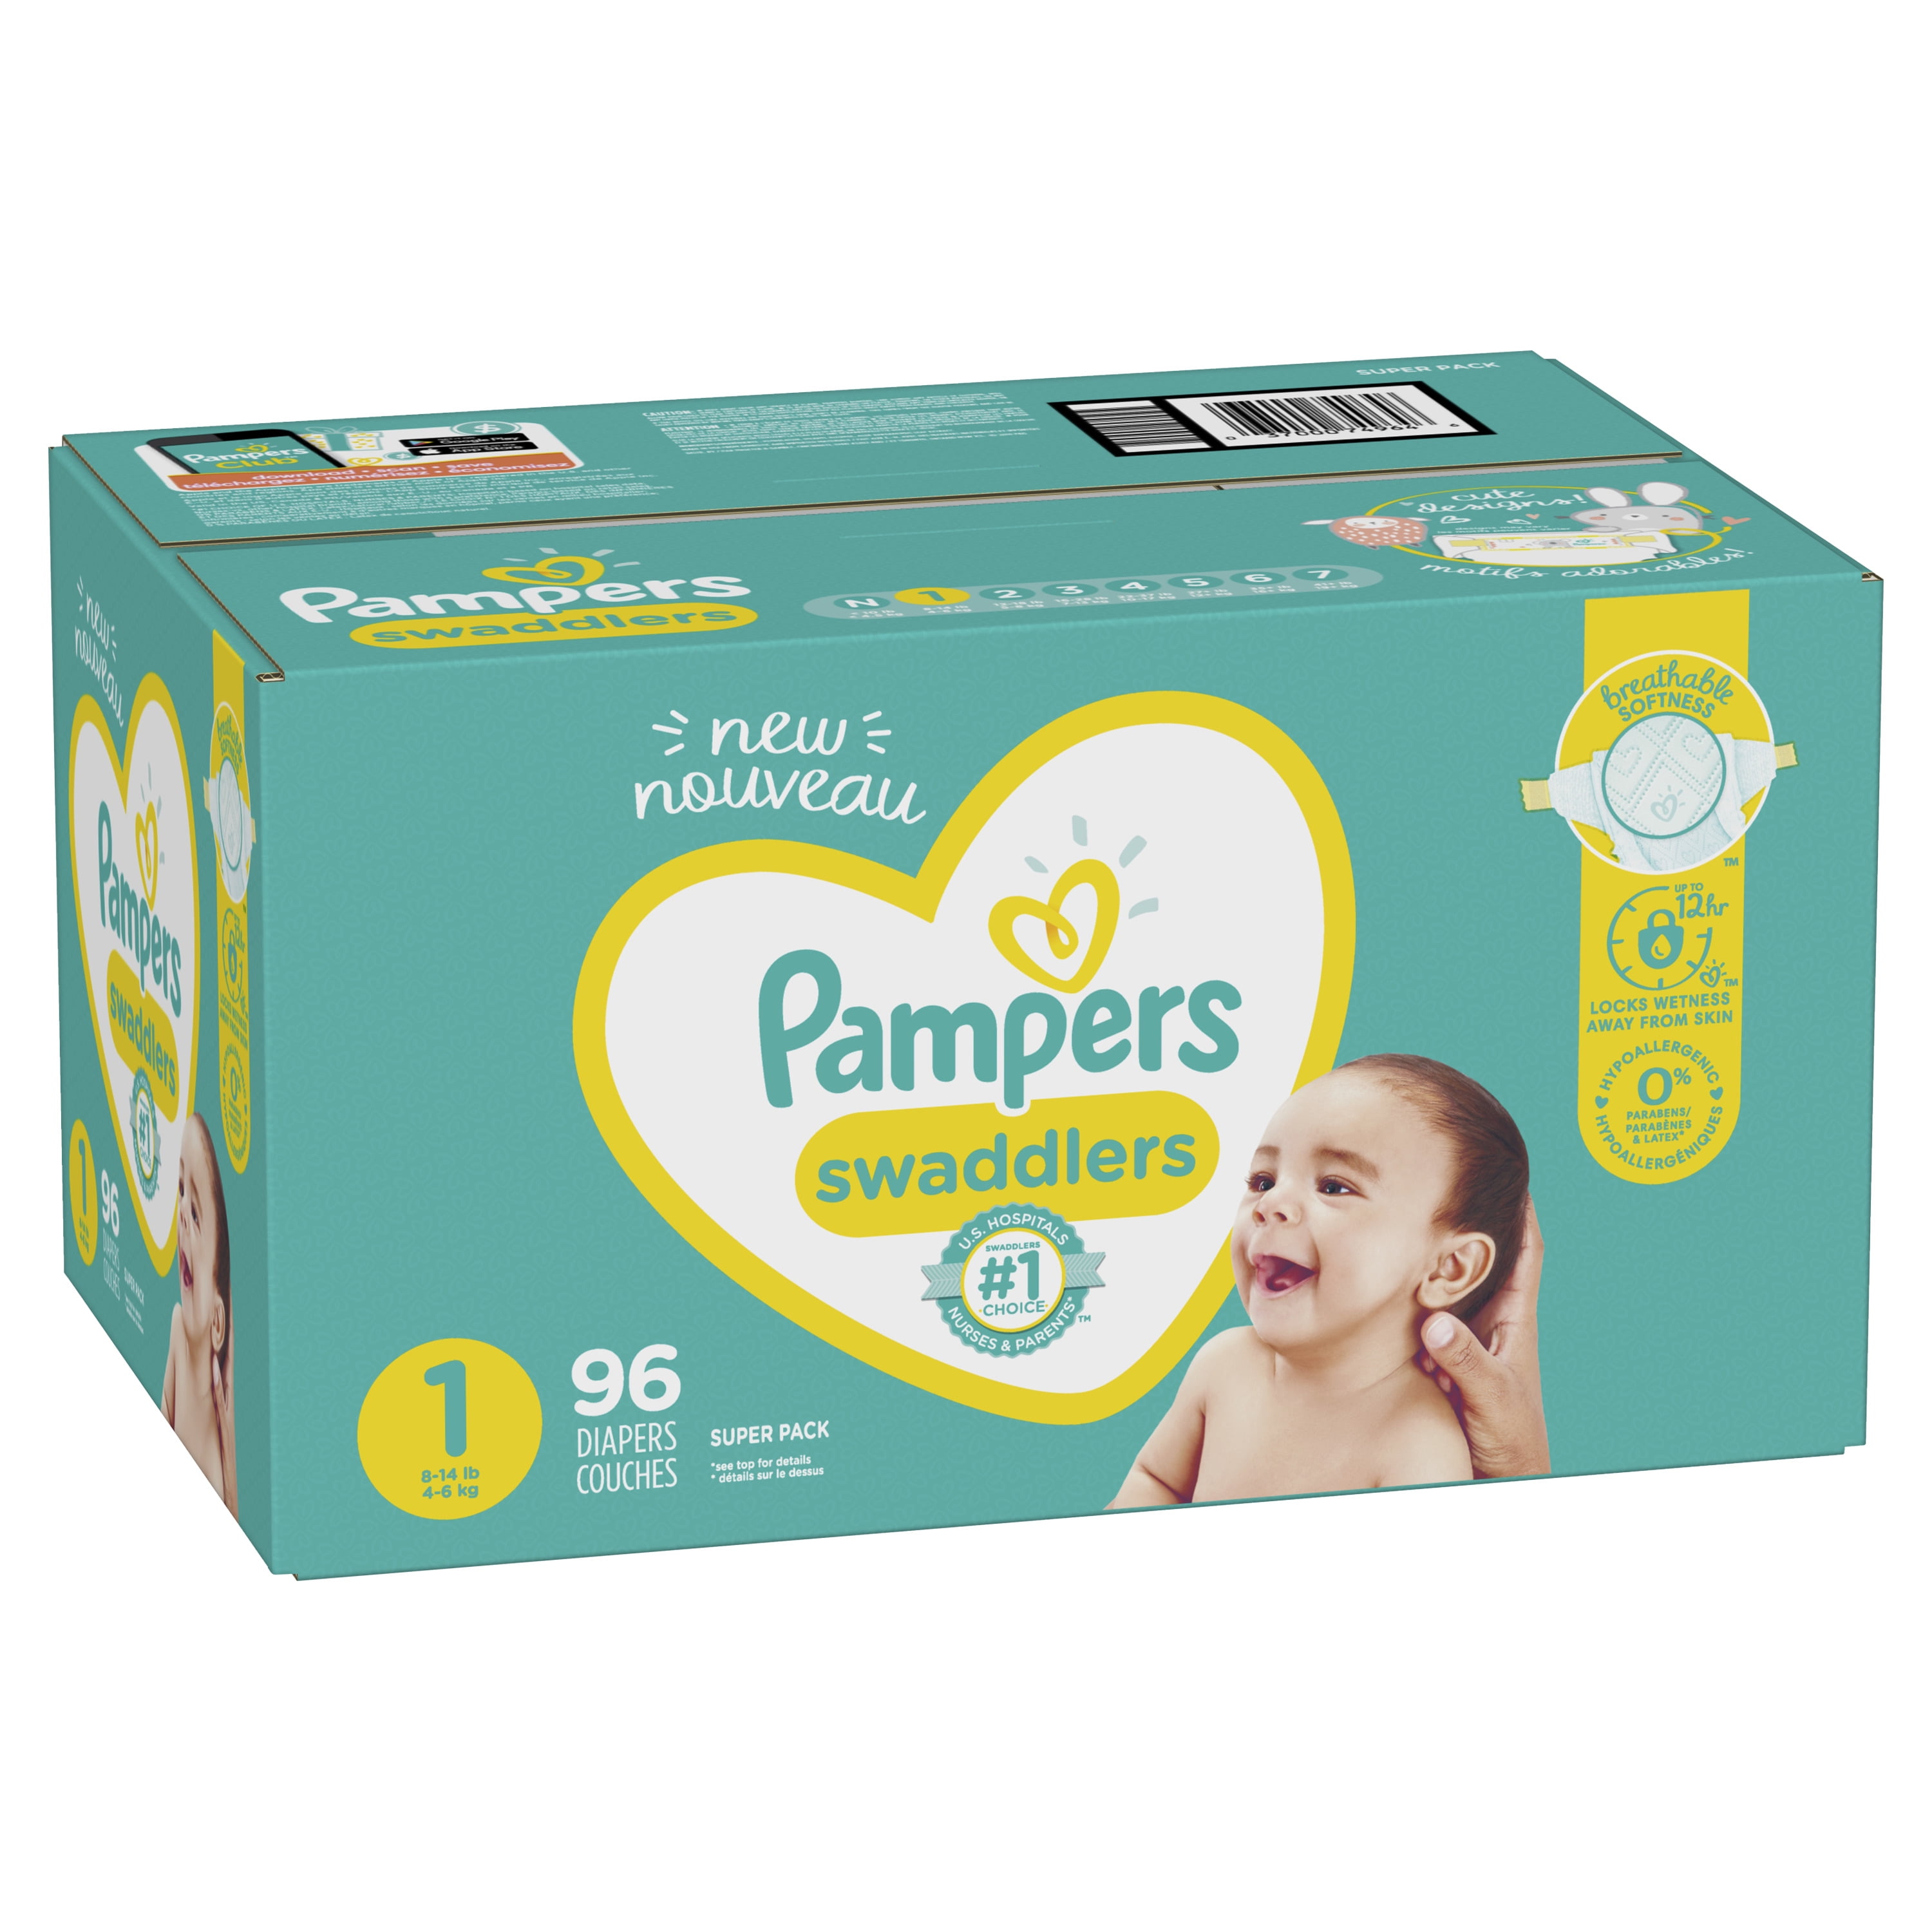 Comprar Pañales Desechables Pampers Swaddlers Talla 1 - 96 Unidades